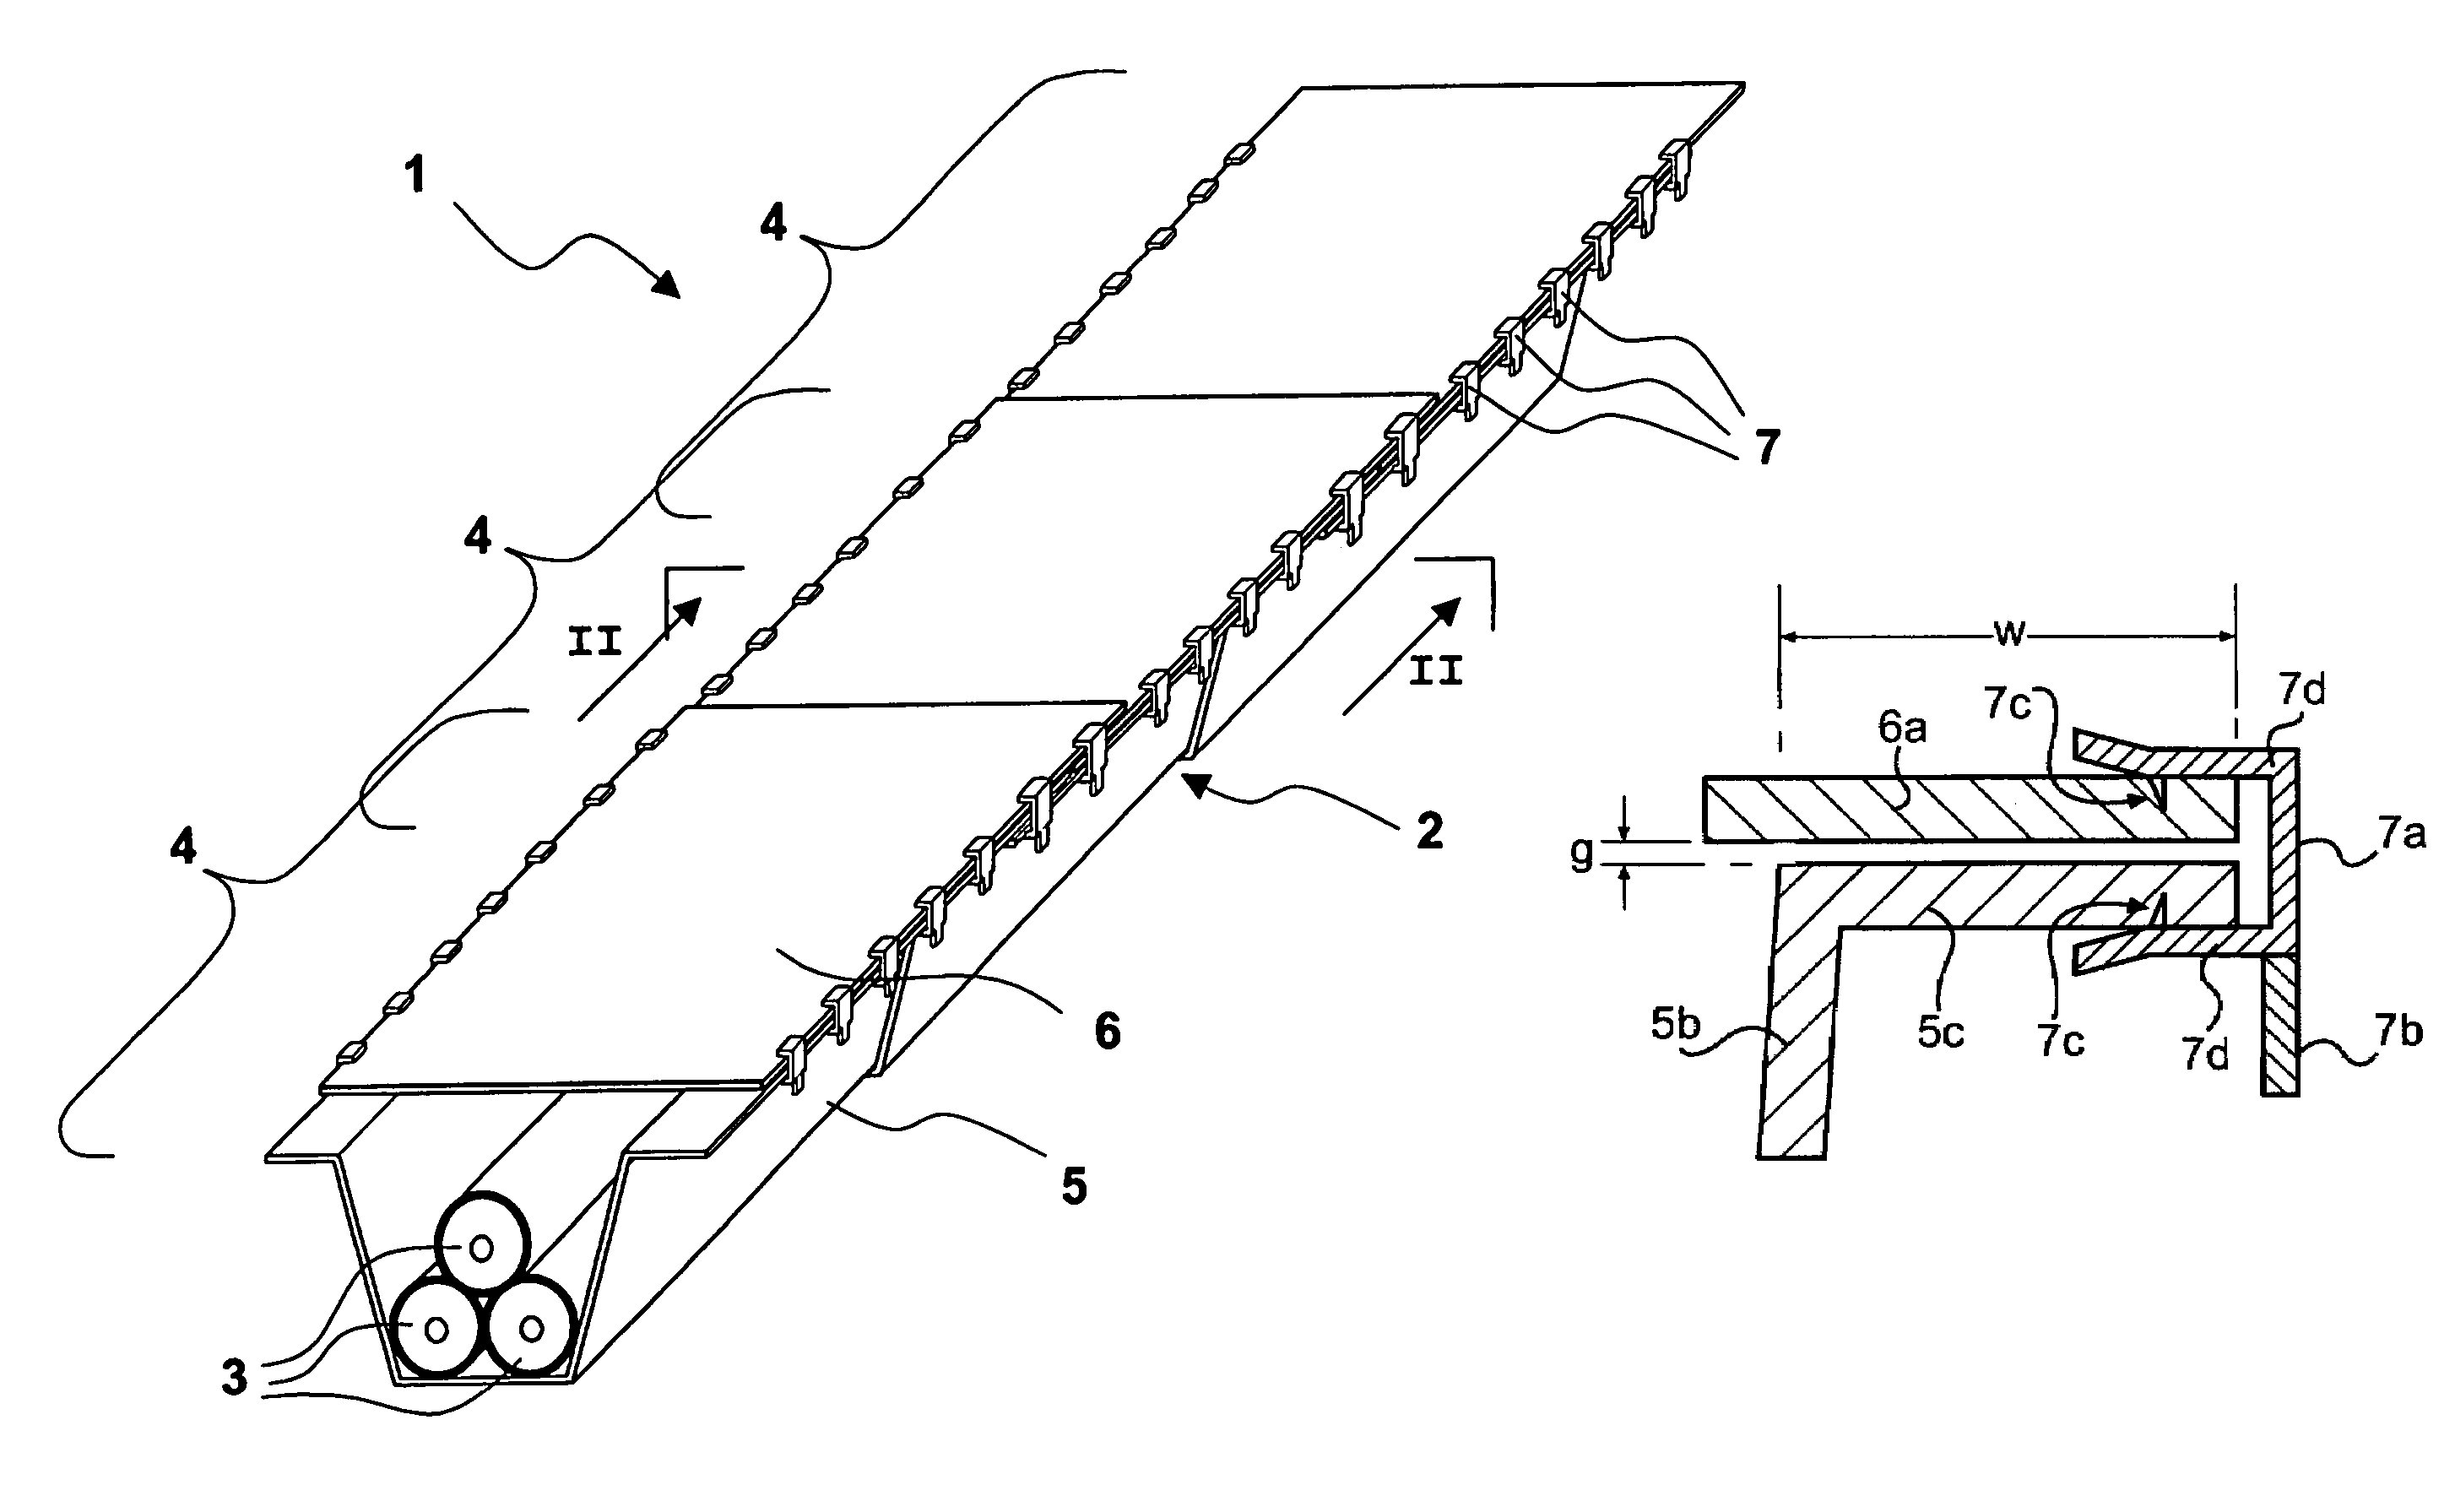 Method of screening the magnetic field generated by an electrical power transmission line and electrical power transmission line so screened